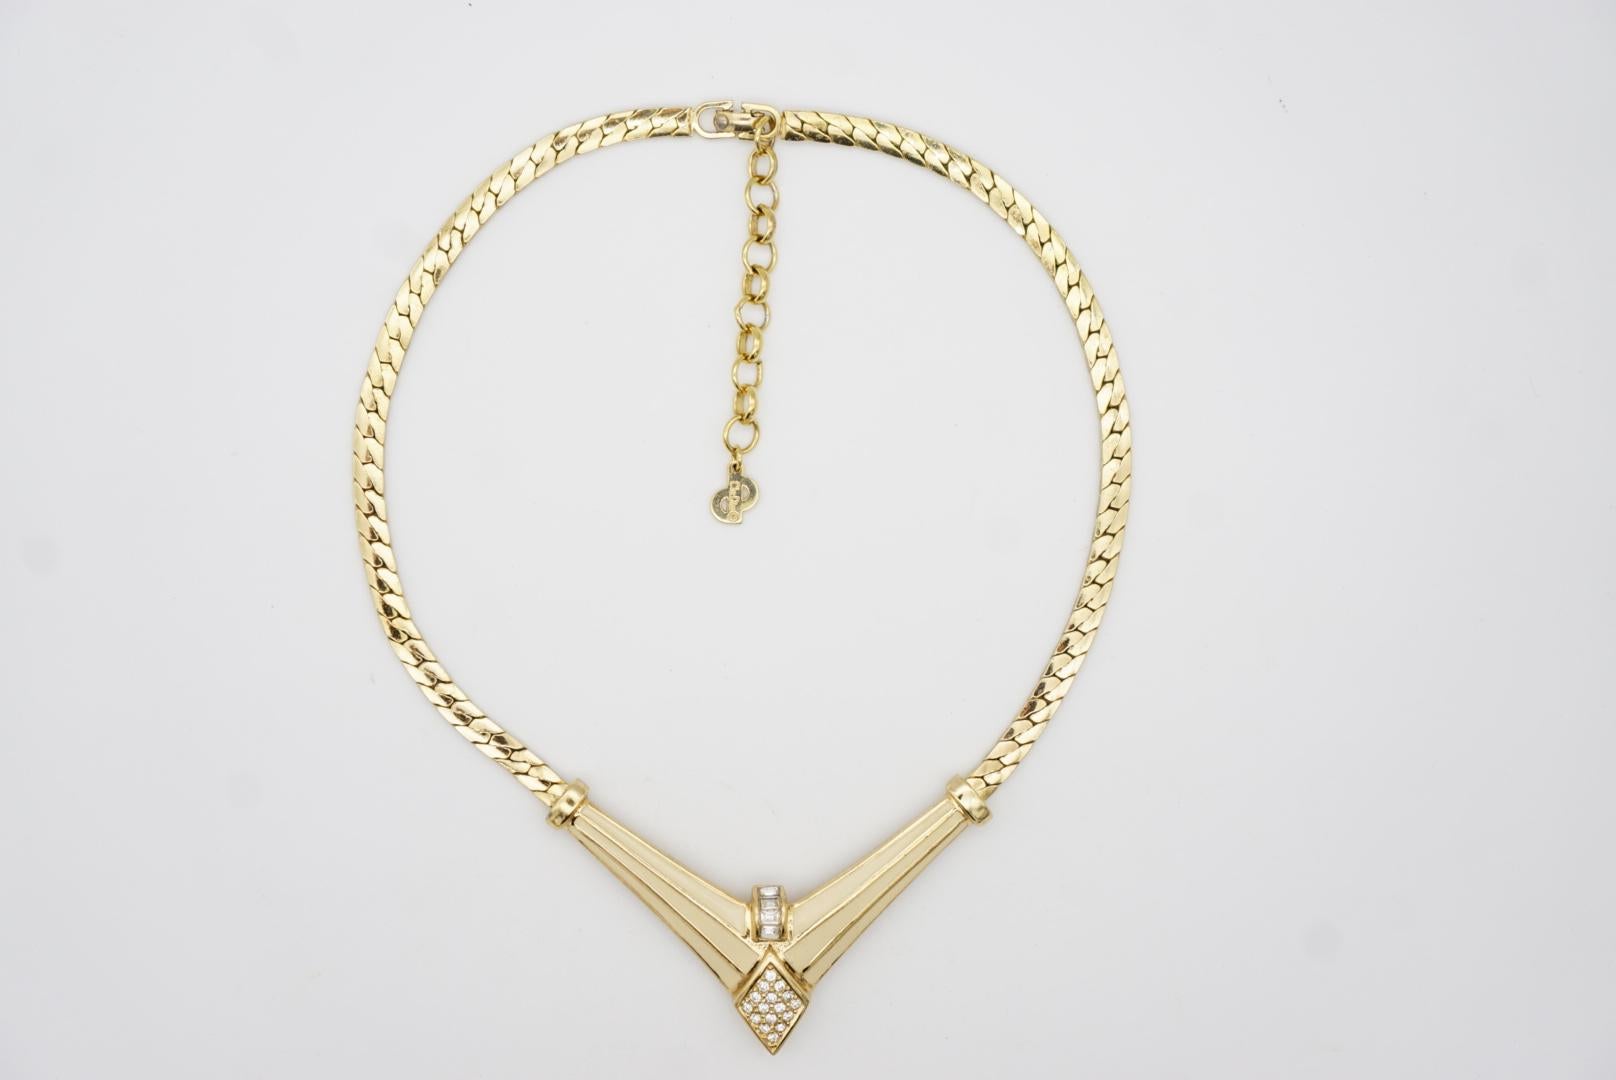 Christian Dior Vintage 1980s Beige Triangle Diamond Crystals Pendant Necklace For Sale 2